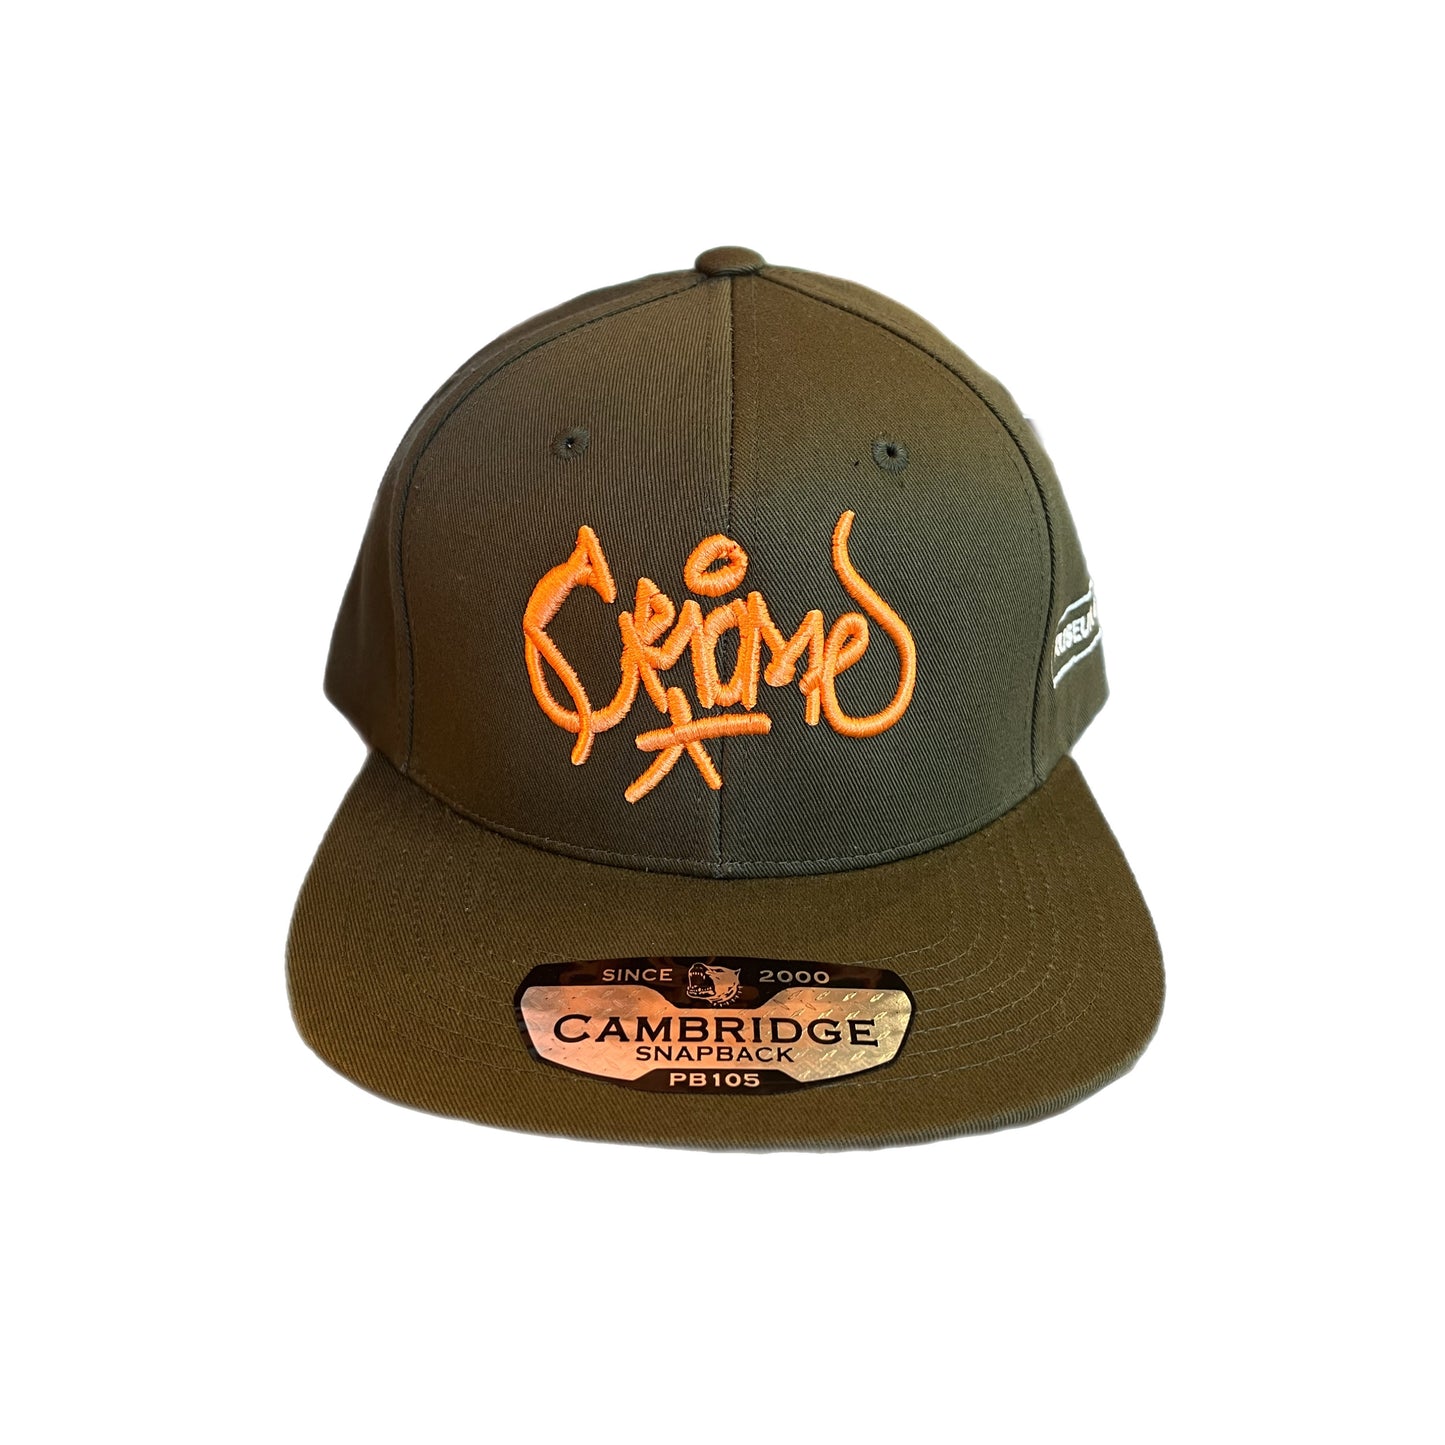 Crome Embroidered Hat